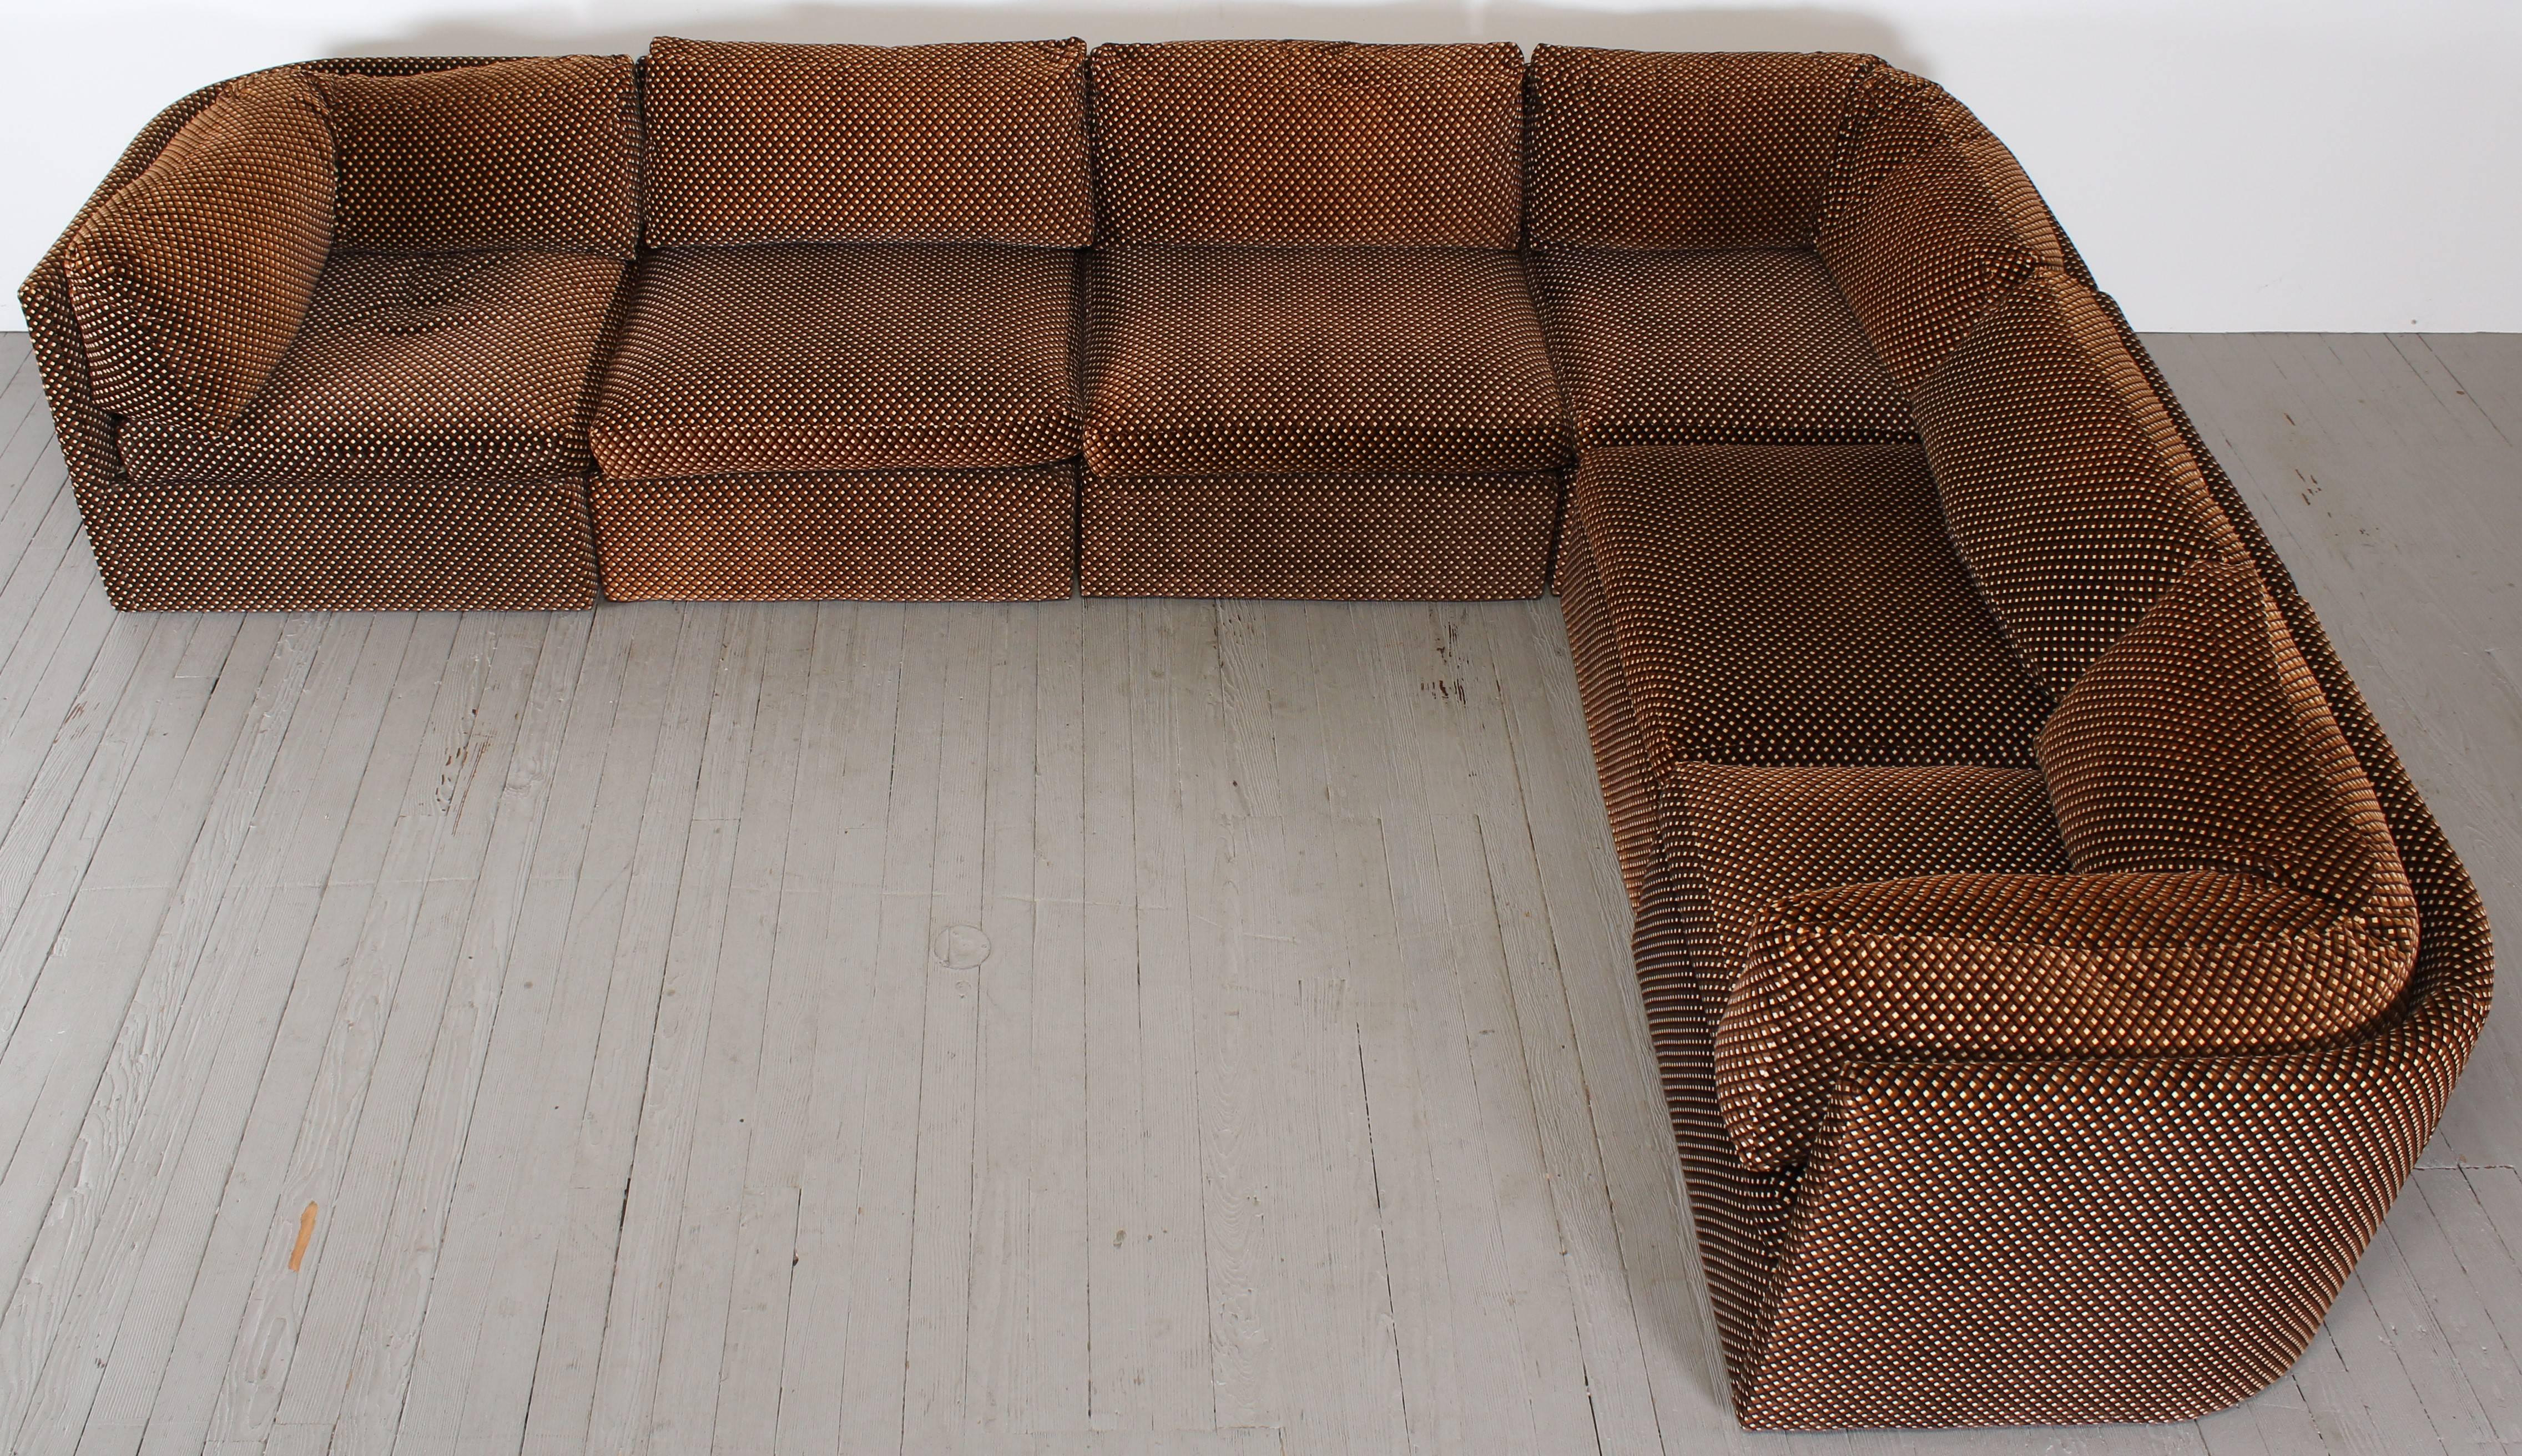 Six piece sectional sofa by Milo Baughman for Thayer Coggin, original tags dating to 1976. Original fabric has no tears or damage, there is variation from sun fading overall, one corner section on back appears to be blotchy from attempted cleaning.